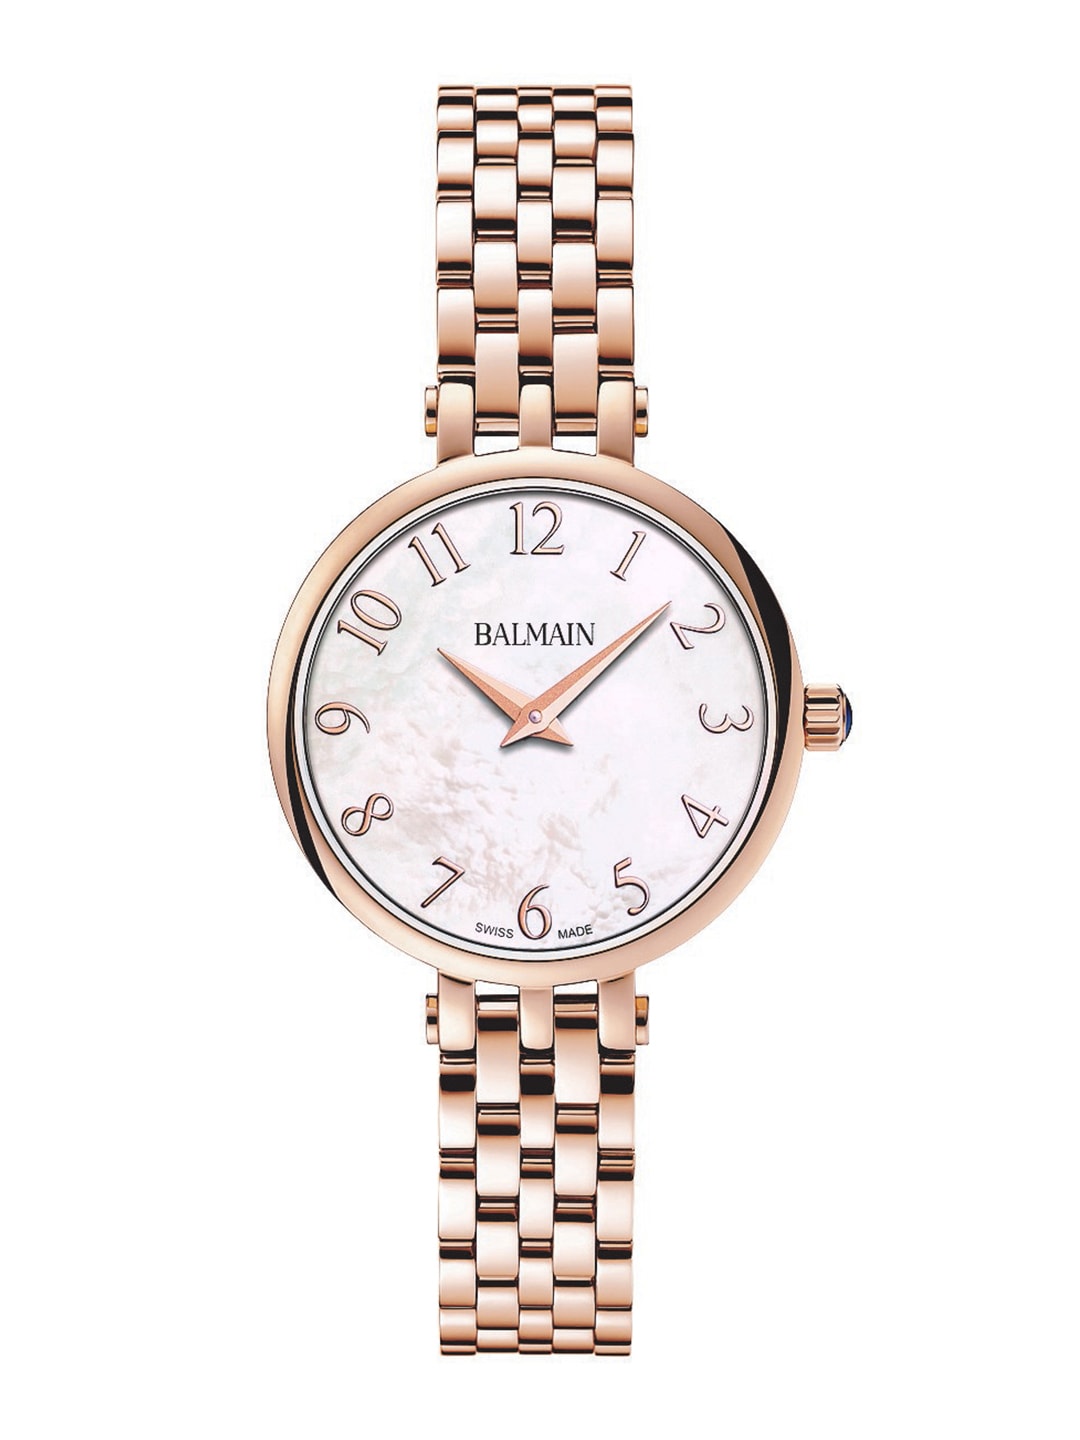 Balmain SEDIREA Women Off-White Swiss Made Mother of Pearl Analogue Watch B42993384 Price in India